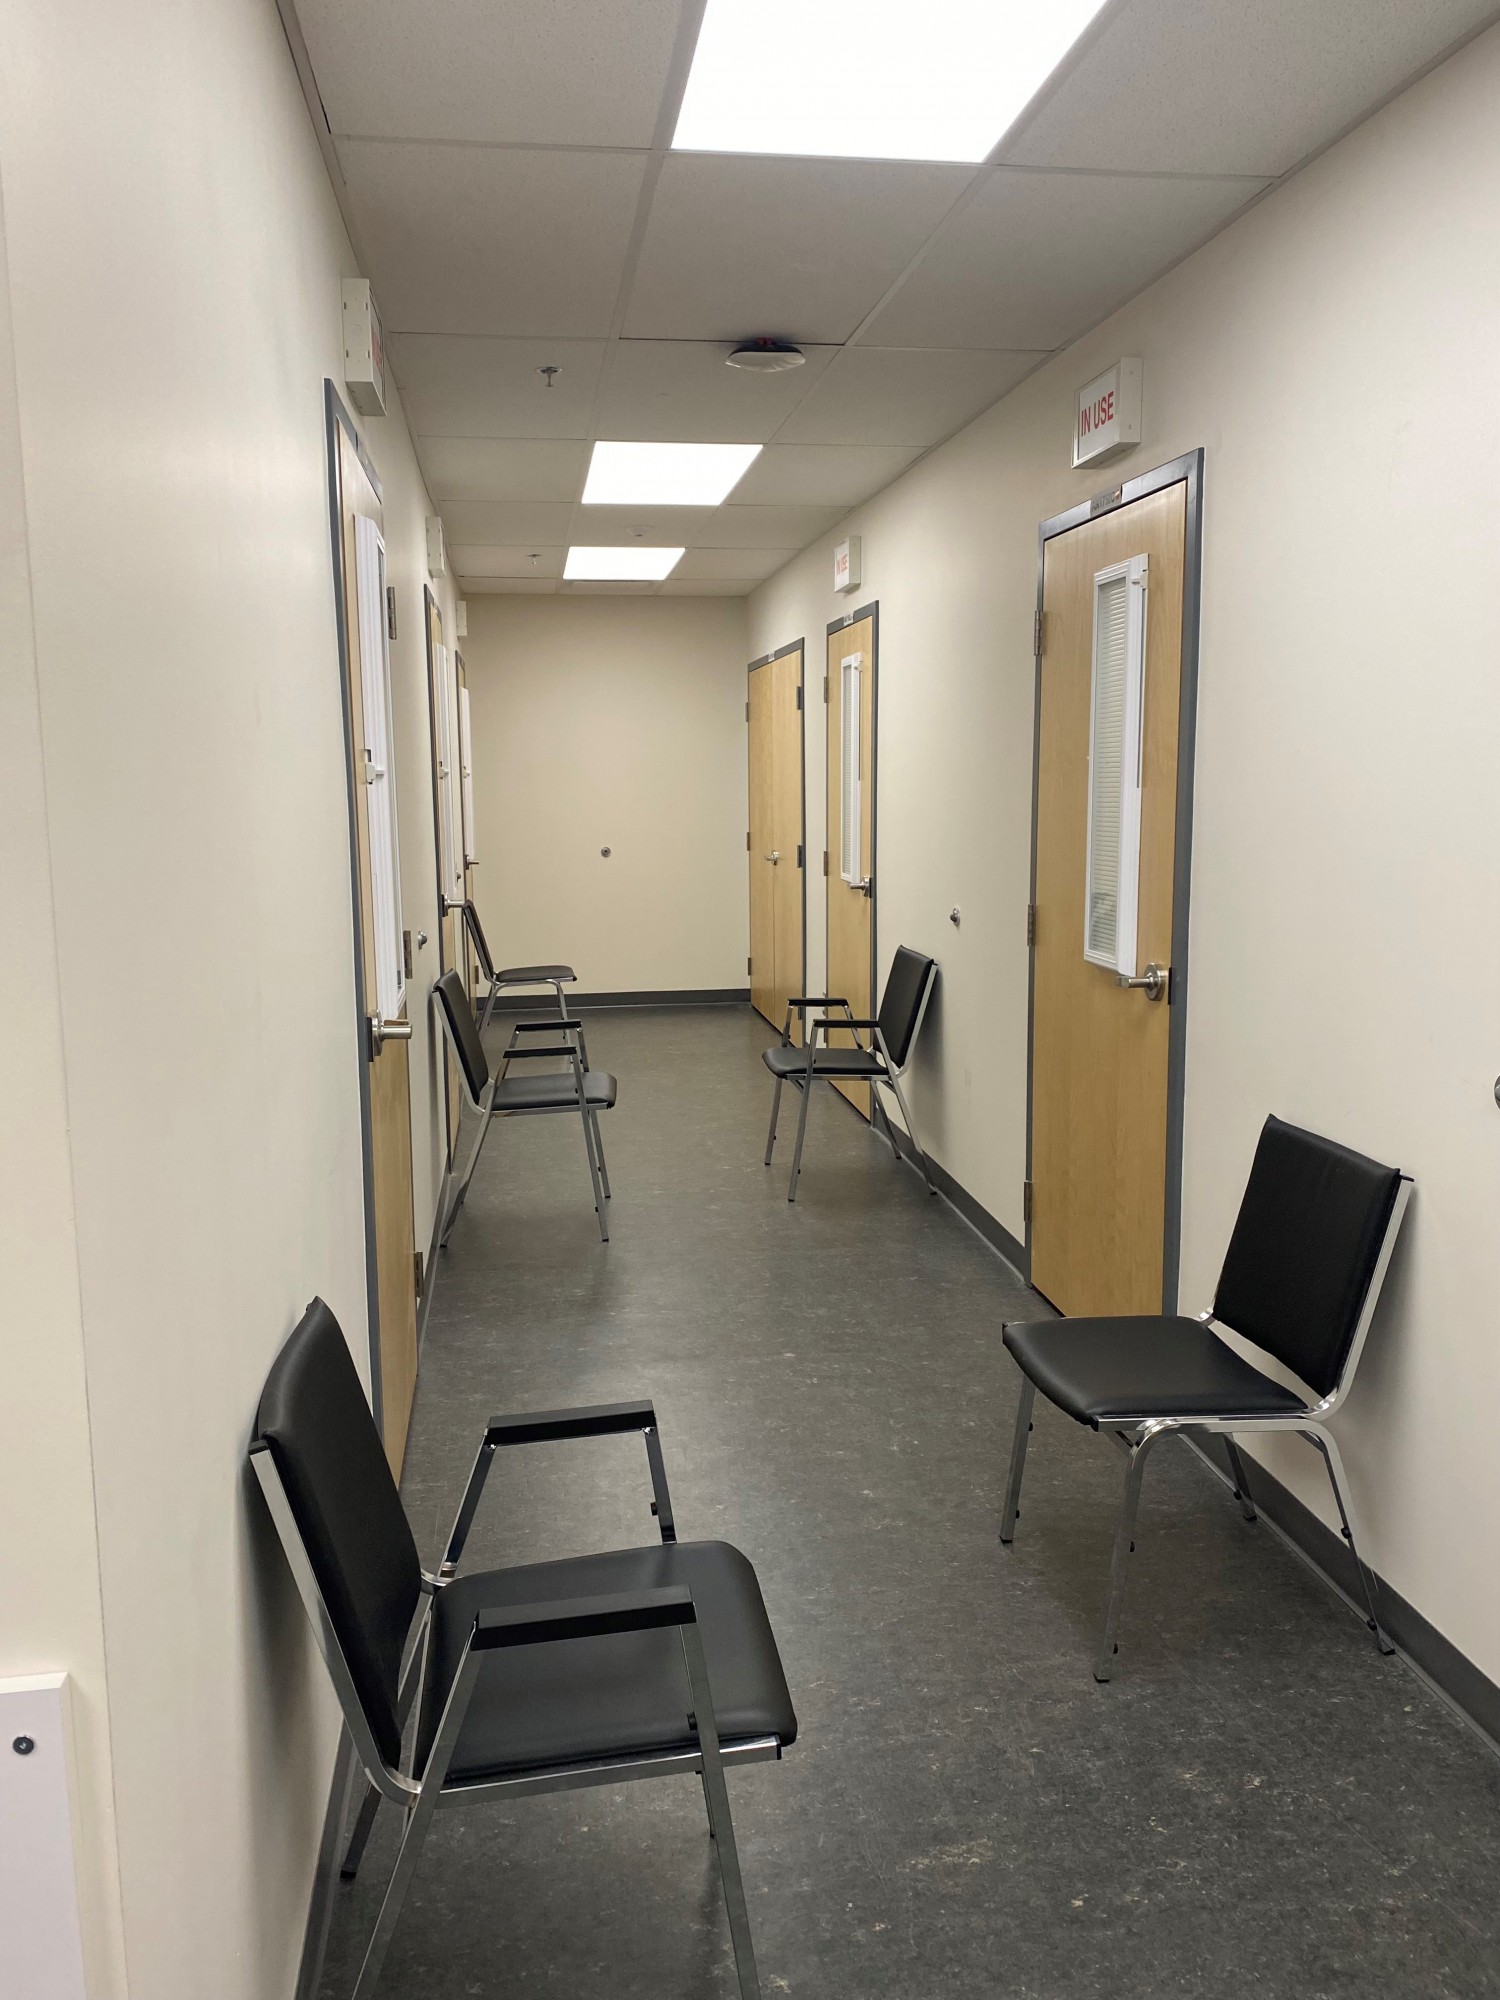 Interview rooms line either side of a hallway.